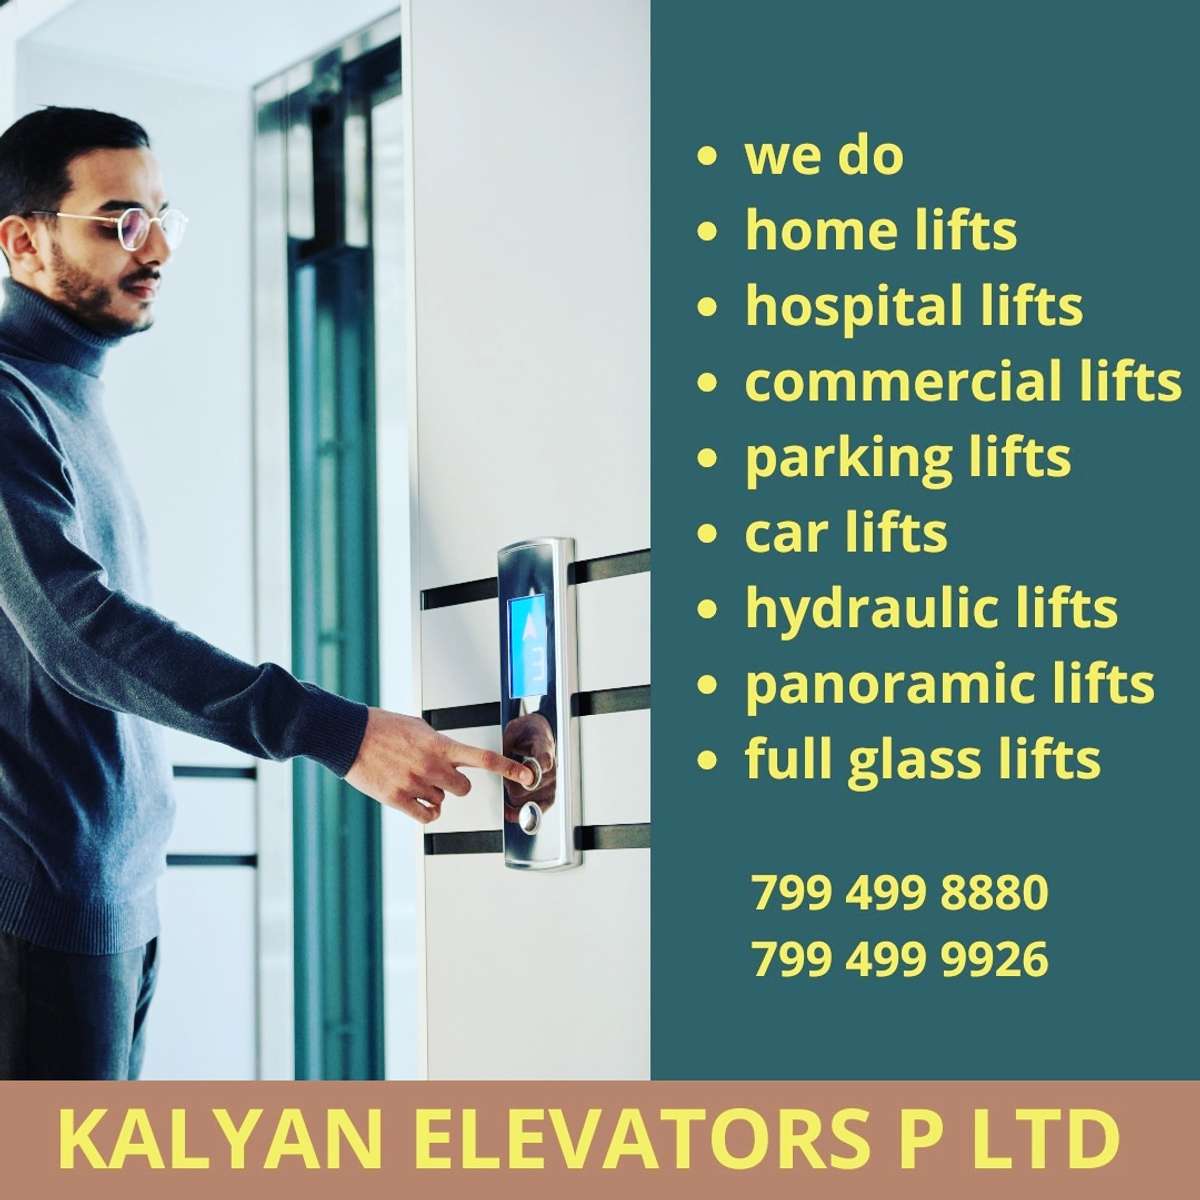 related home lifts please contact